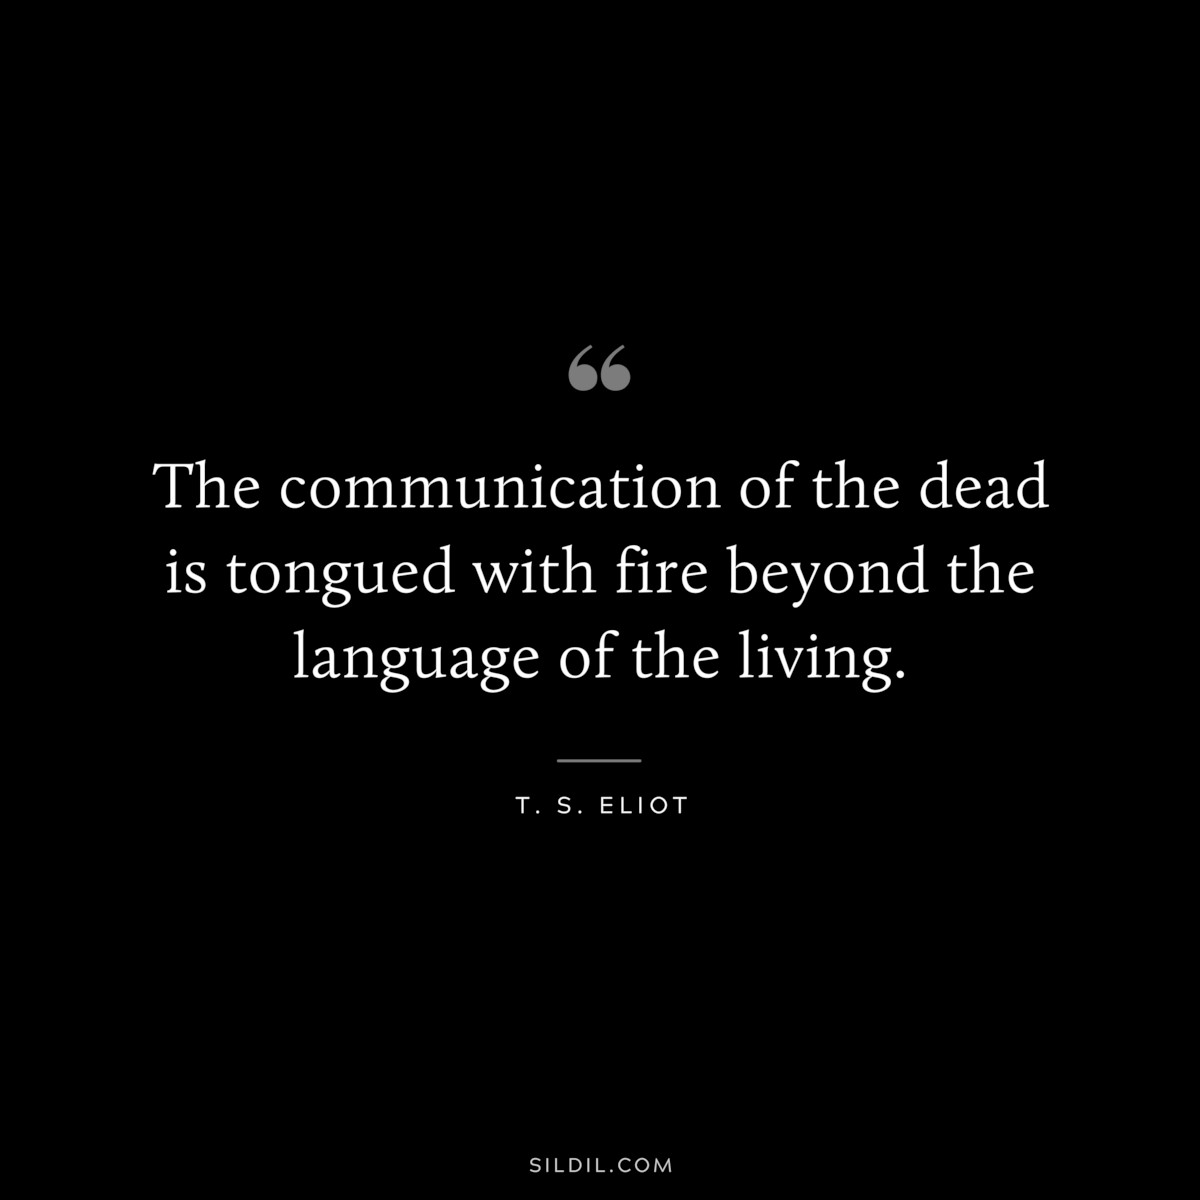 The communication of the dead is tongued with fire beyond the language of the living. ― T. S. Eliot